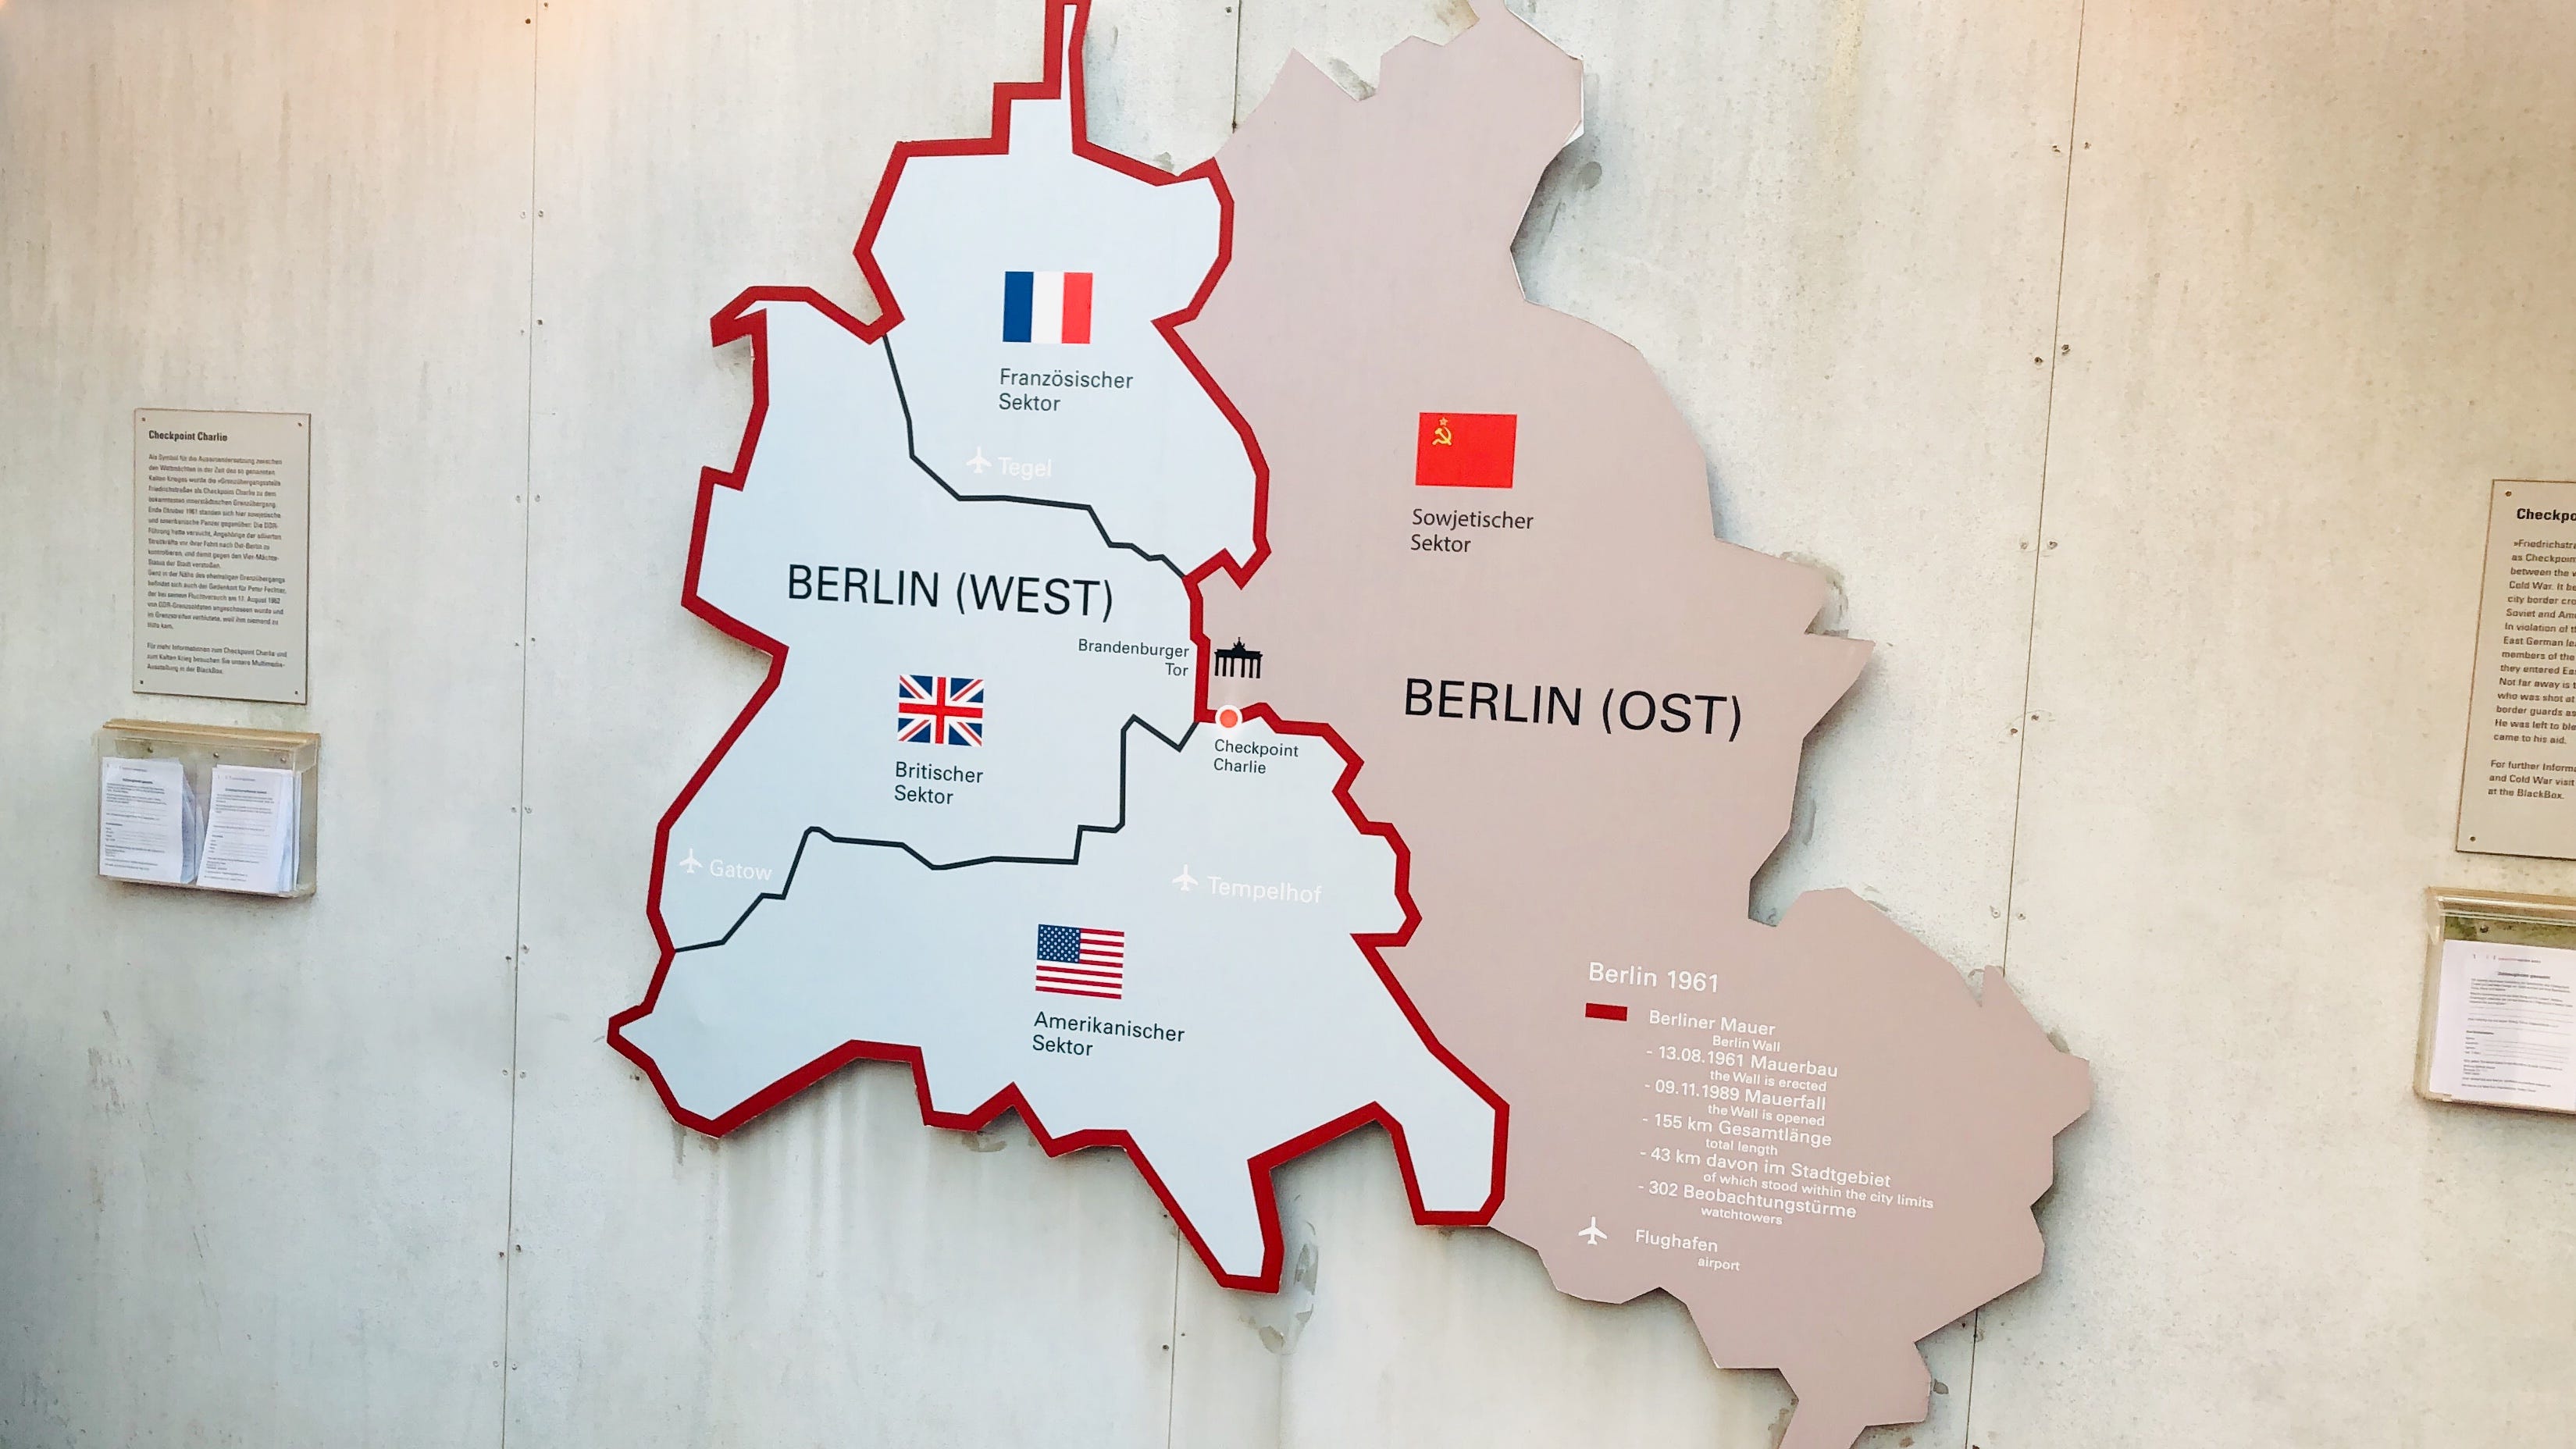 Berlin Day 2 Mapping The City Theme Political Freedom By Bohan Chen Medium political freedom by bohan chen